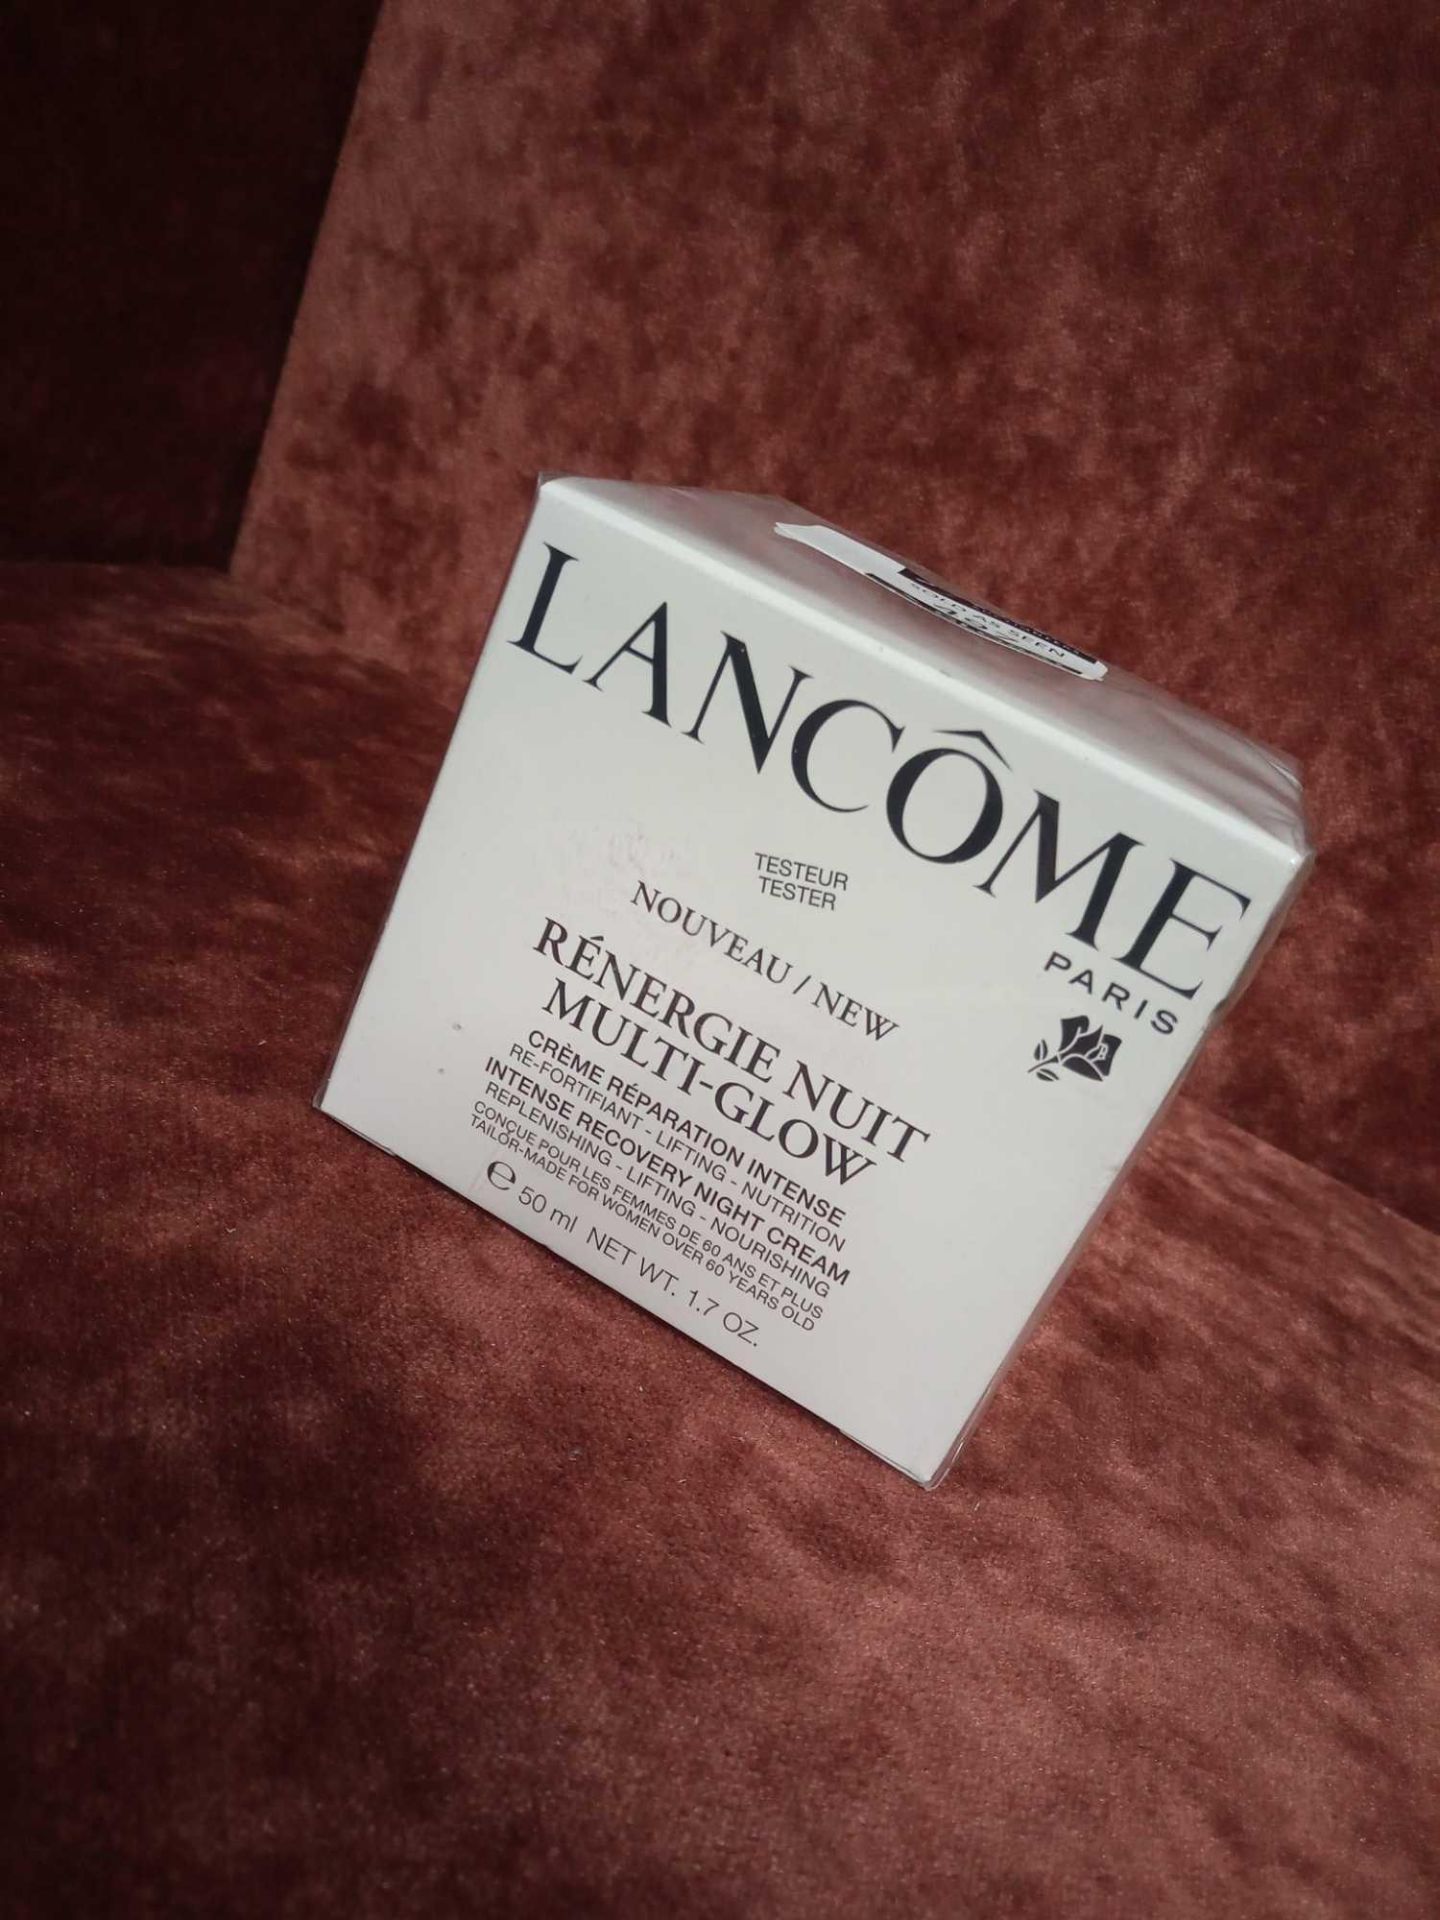 RRP £70 Brand New Boxed And Sealed Tester Of Lancôme Paris Renergie Nuit Multi Glow 50Ml Firming An - Image 2 of 3